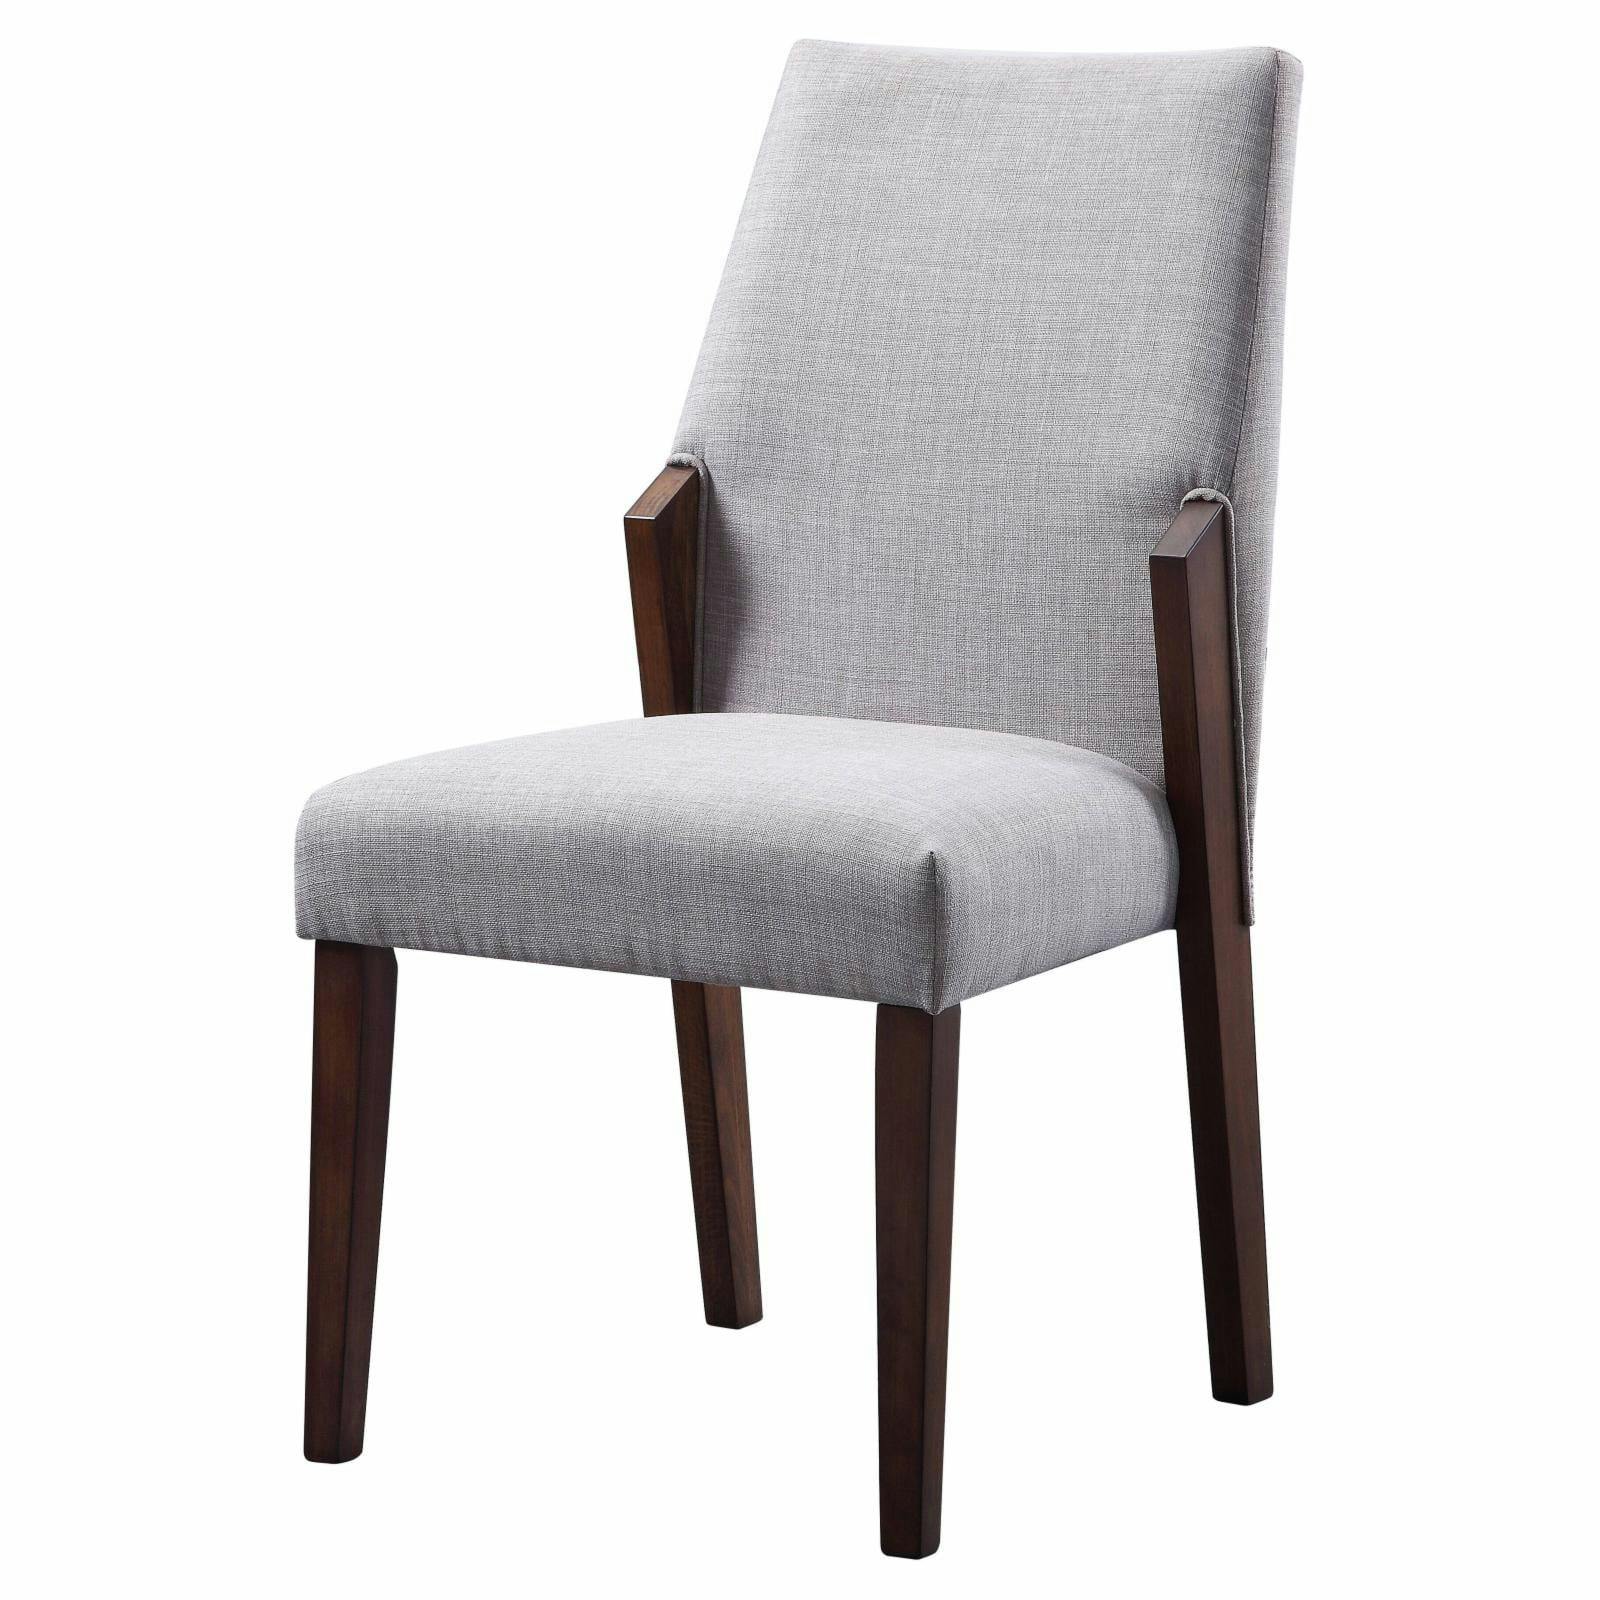 Bernice Modern Upholstered Side Chair in Brown and Gray - Set of 2